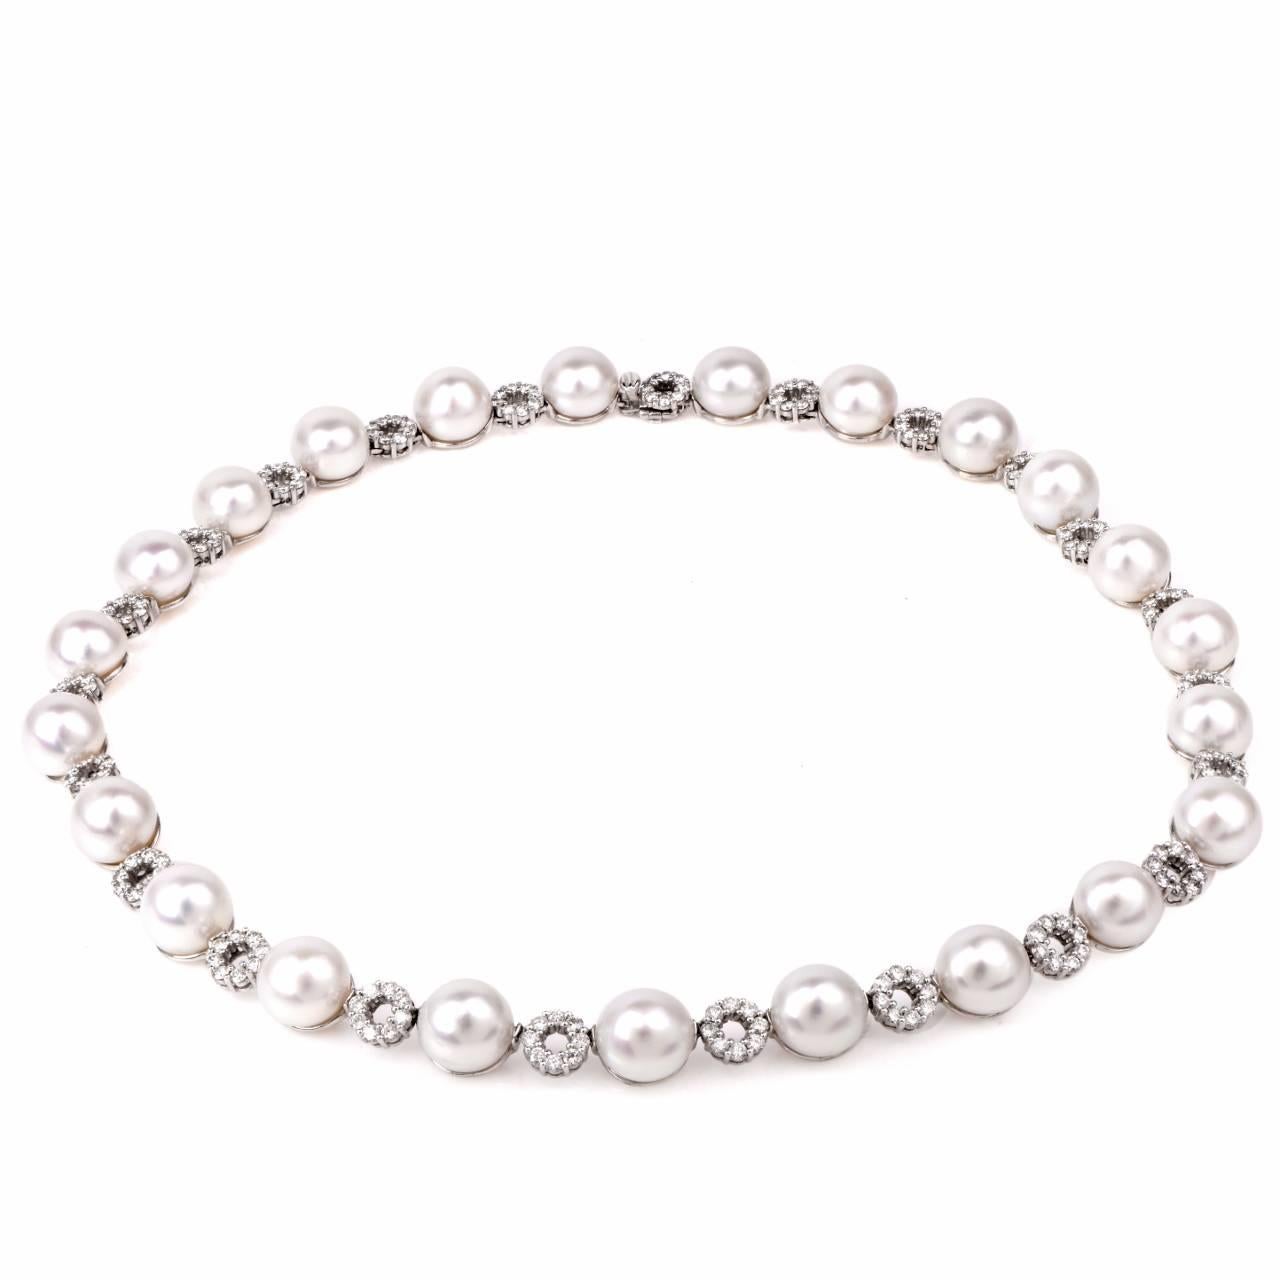 This aesthetically necklace with 23 lustrous south Sea pearls measuring 12 mm in diameter of an enchanting 'white with a pinkish hue' color is crafted in solid 18K white gold and measures 19